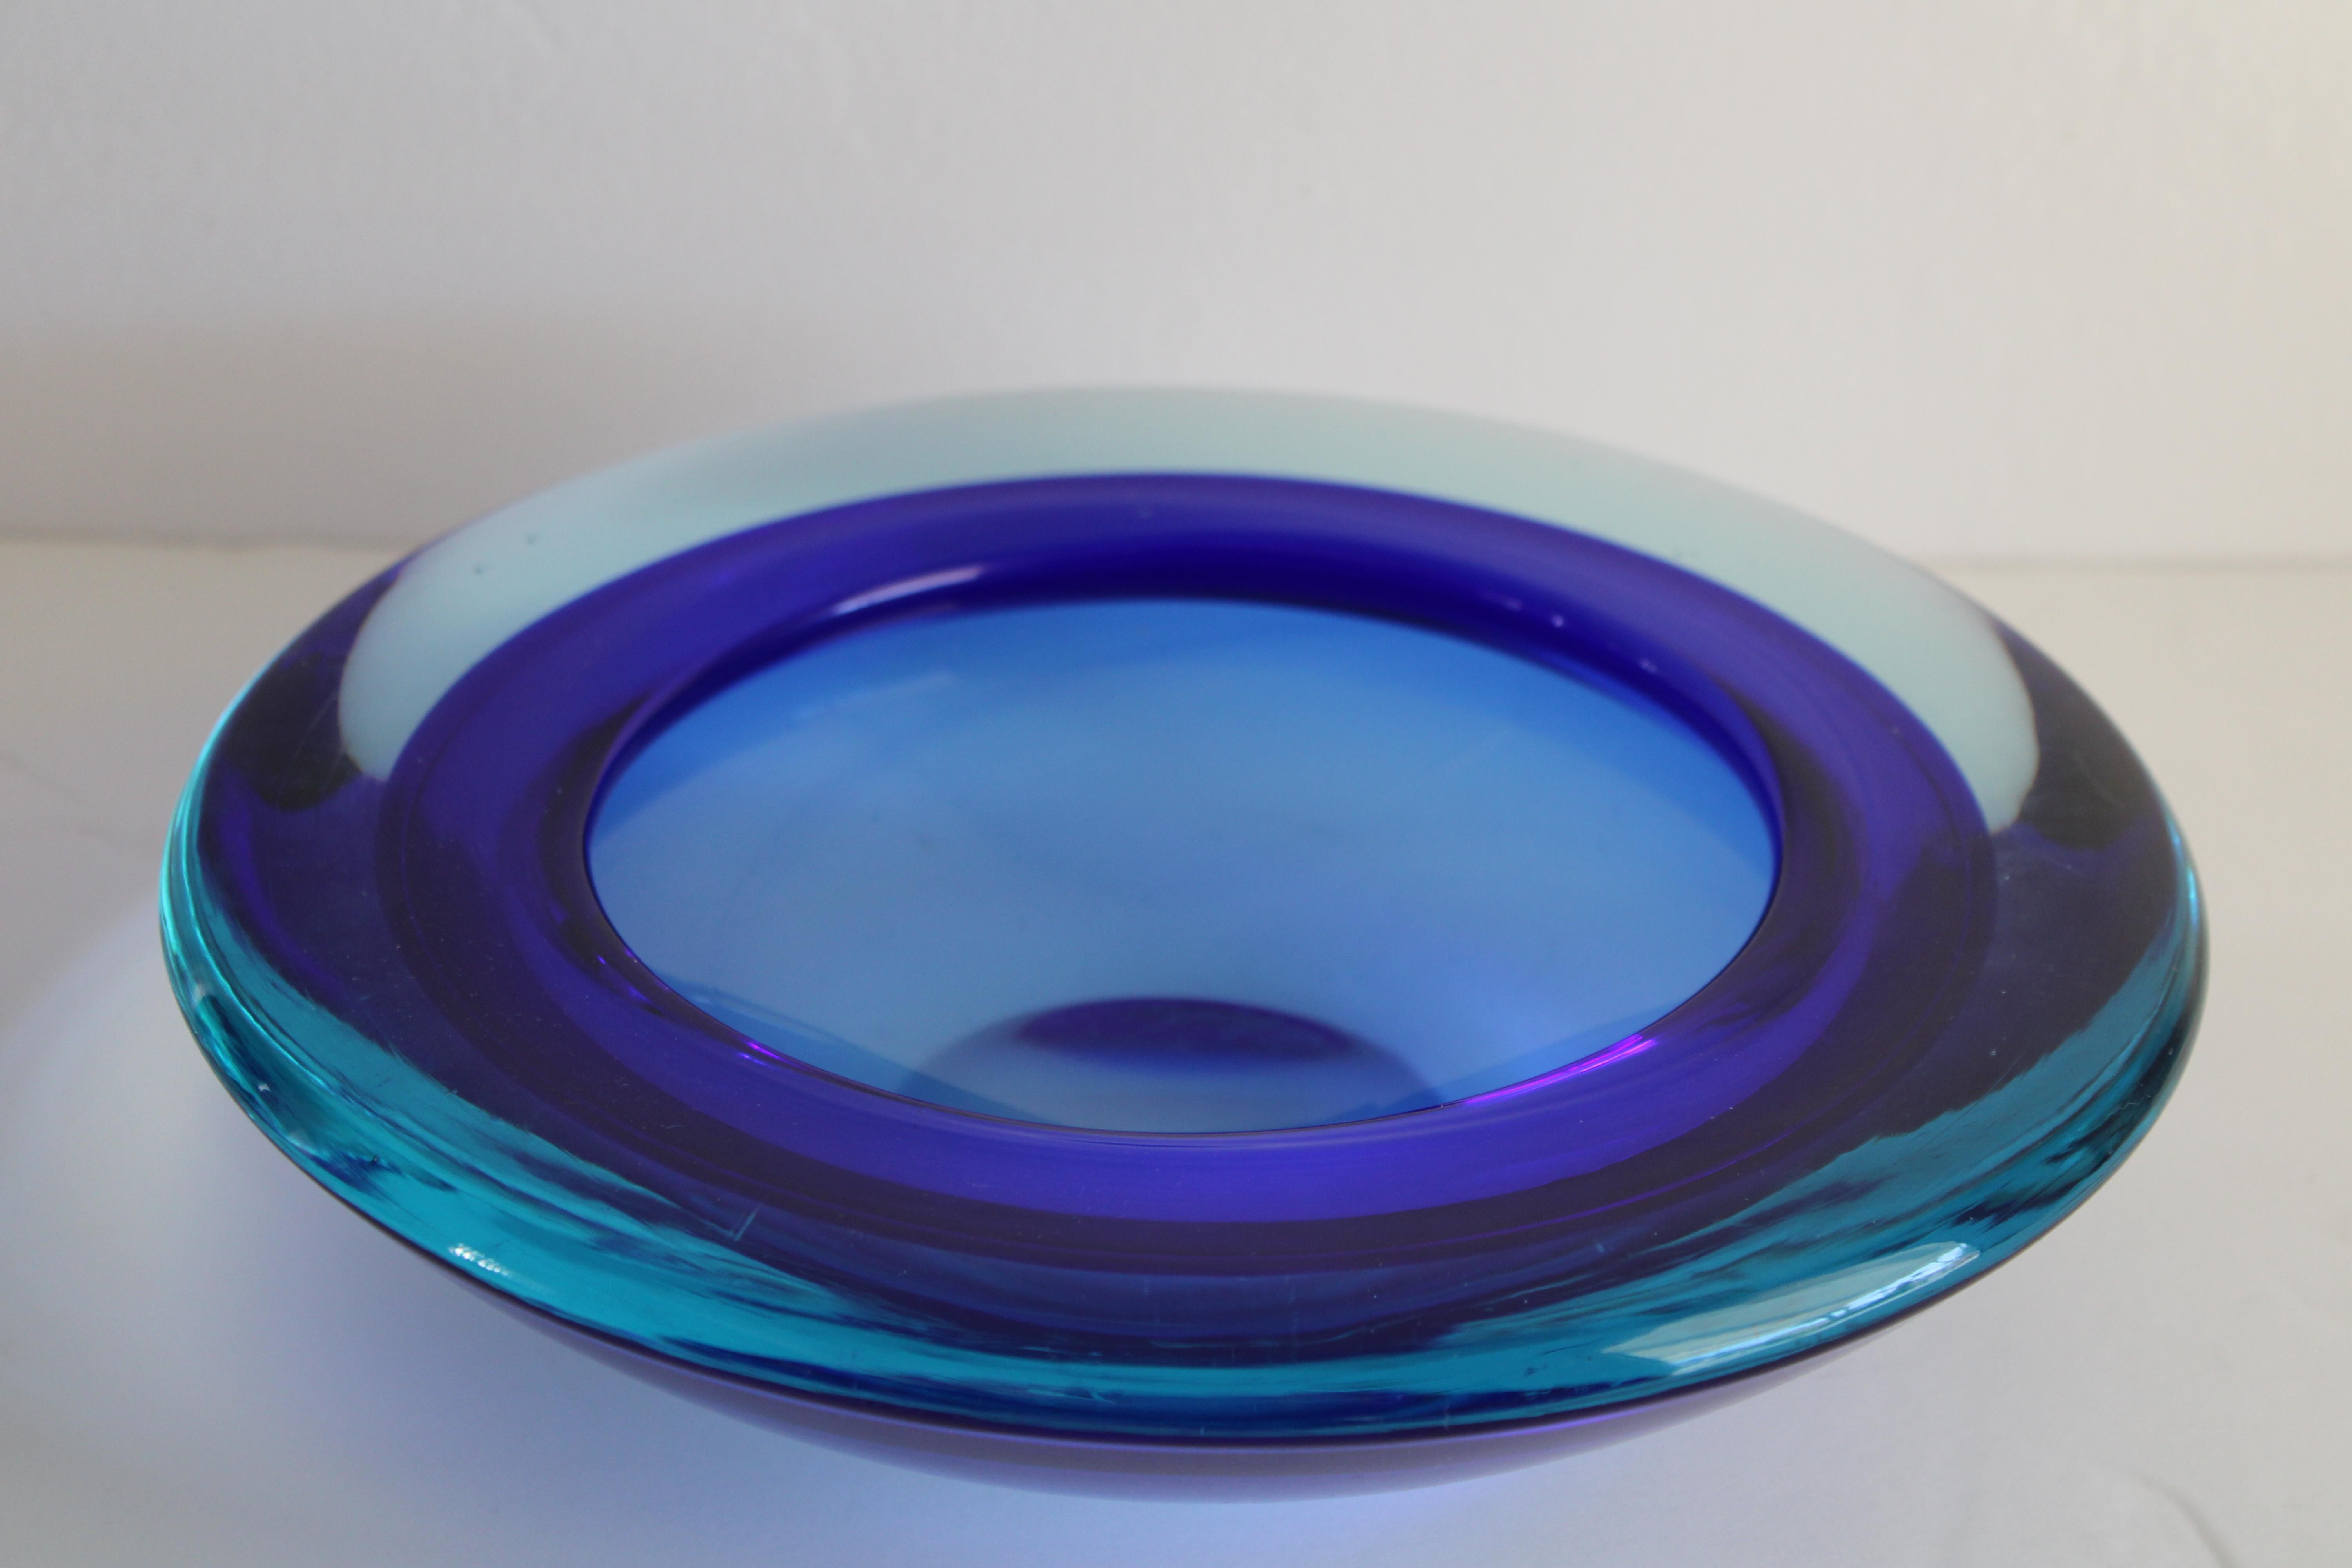 Murano geode bowl by Cenedese. Vibrant smoke color with dark blues. Bowl measures 2.75